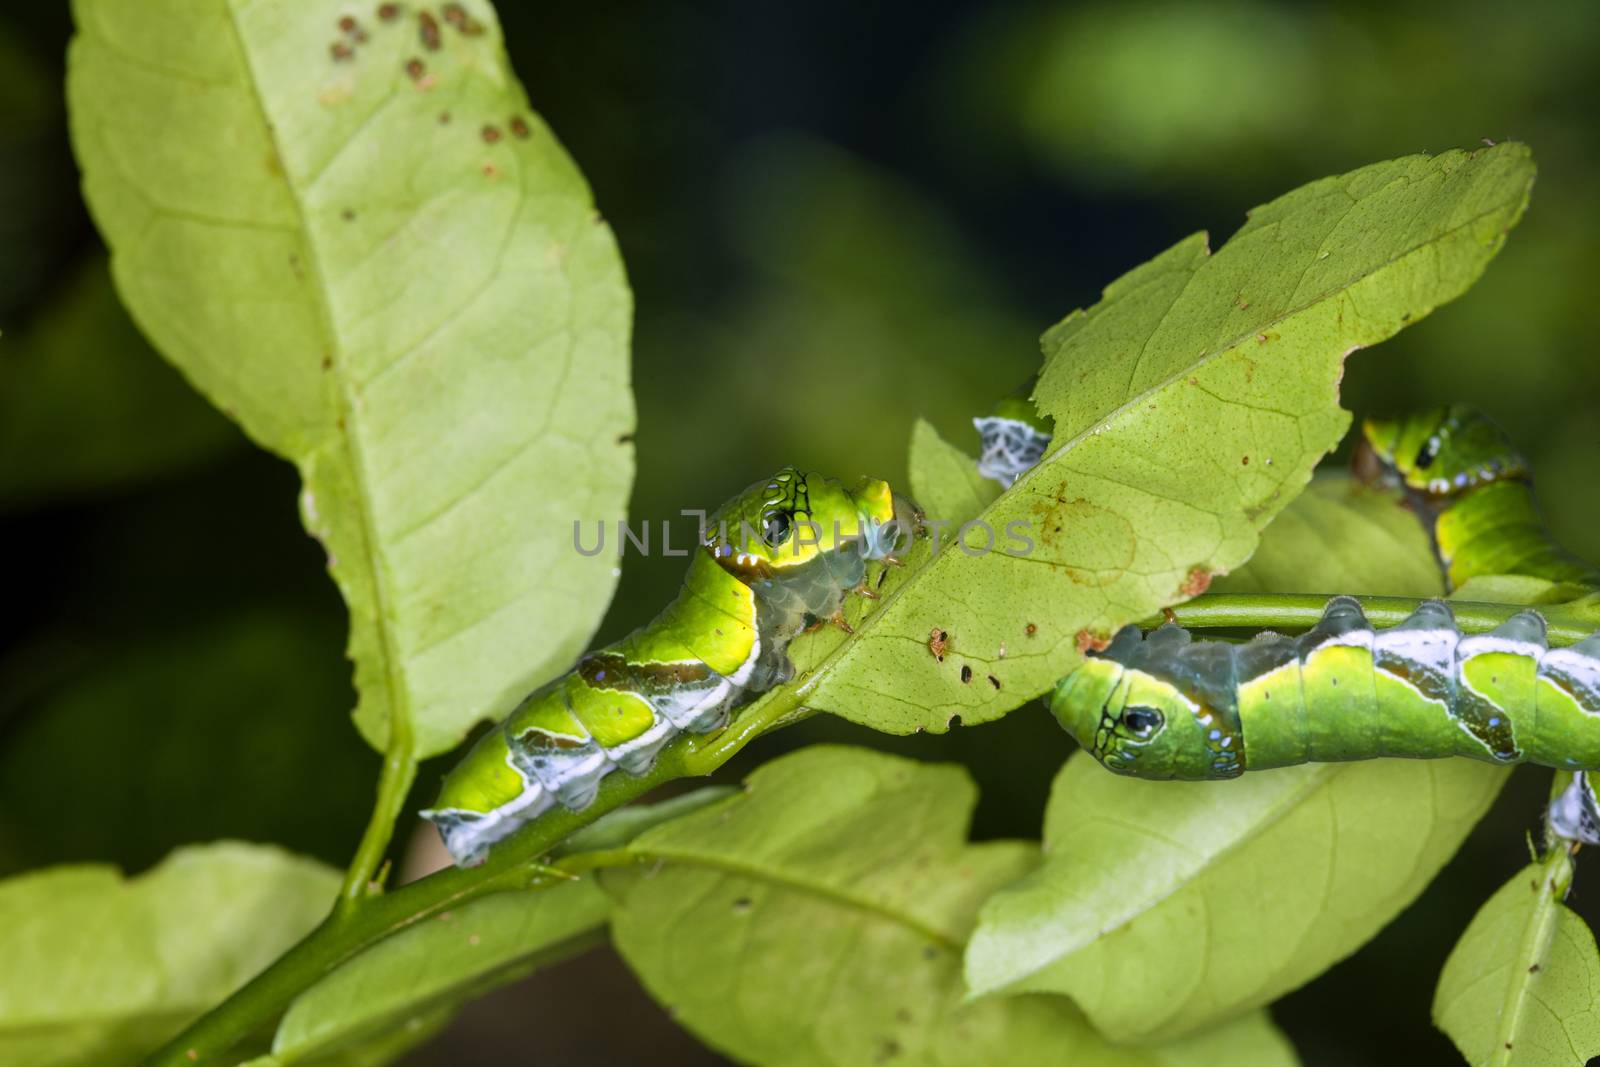 caterpillar worm on branch in the garden by jee1999